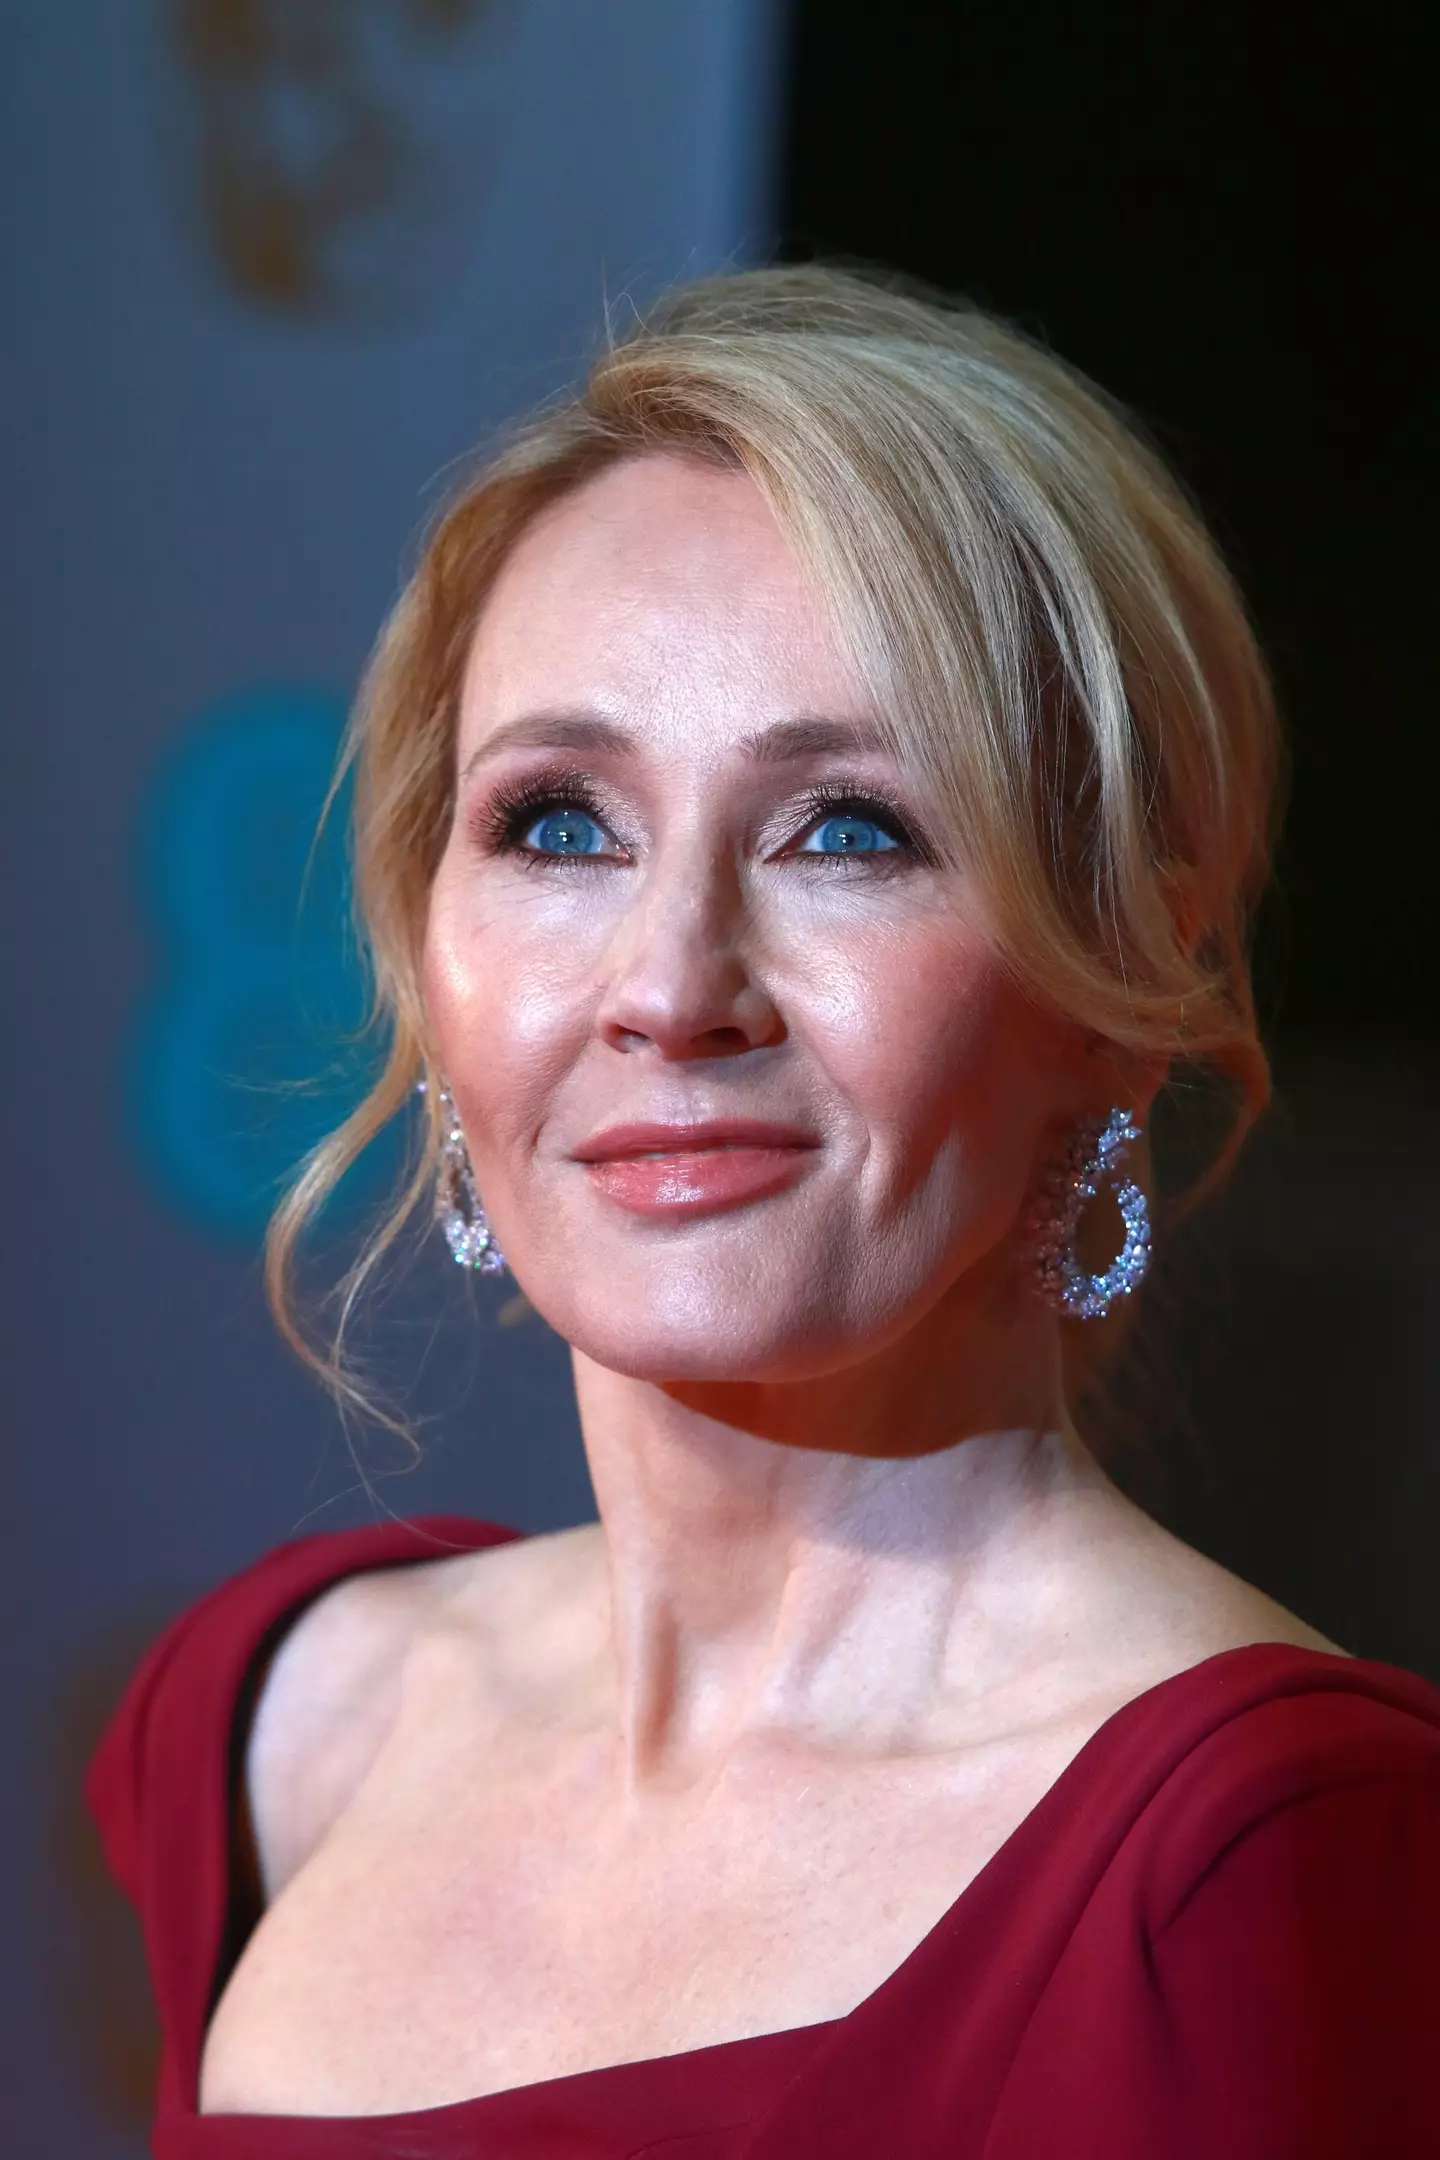 It's all down to J.K Rowling whether or not a series will go ahead.